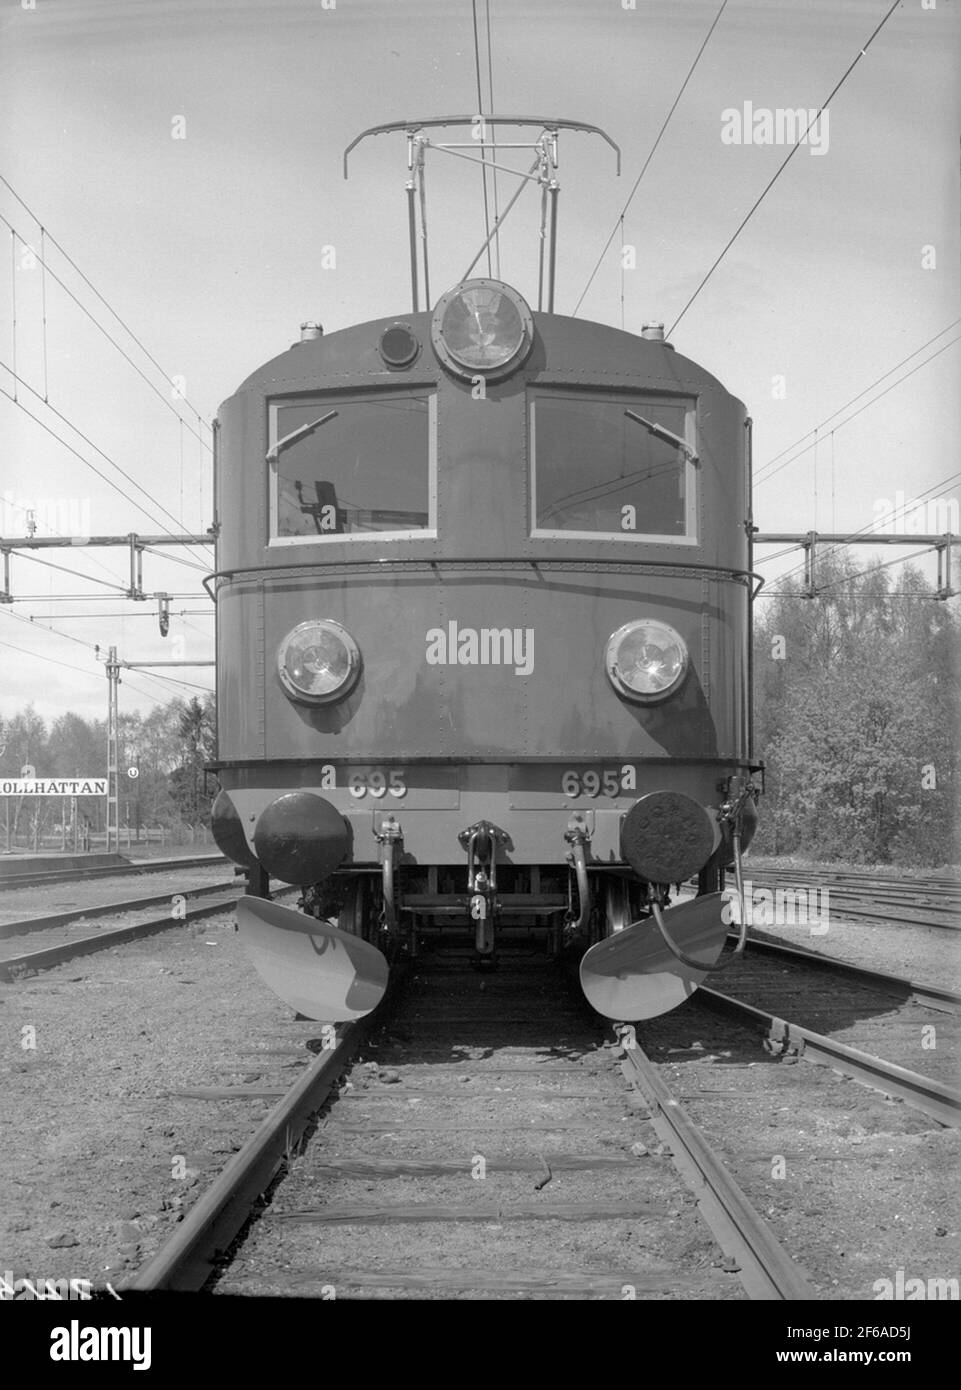 State Railways, SJ F 695. Delivery Photo. Manufactured by Nohab (Company number: 3056) Stock Photo